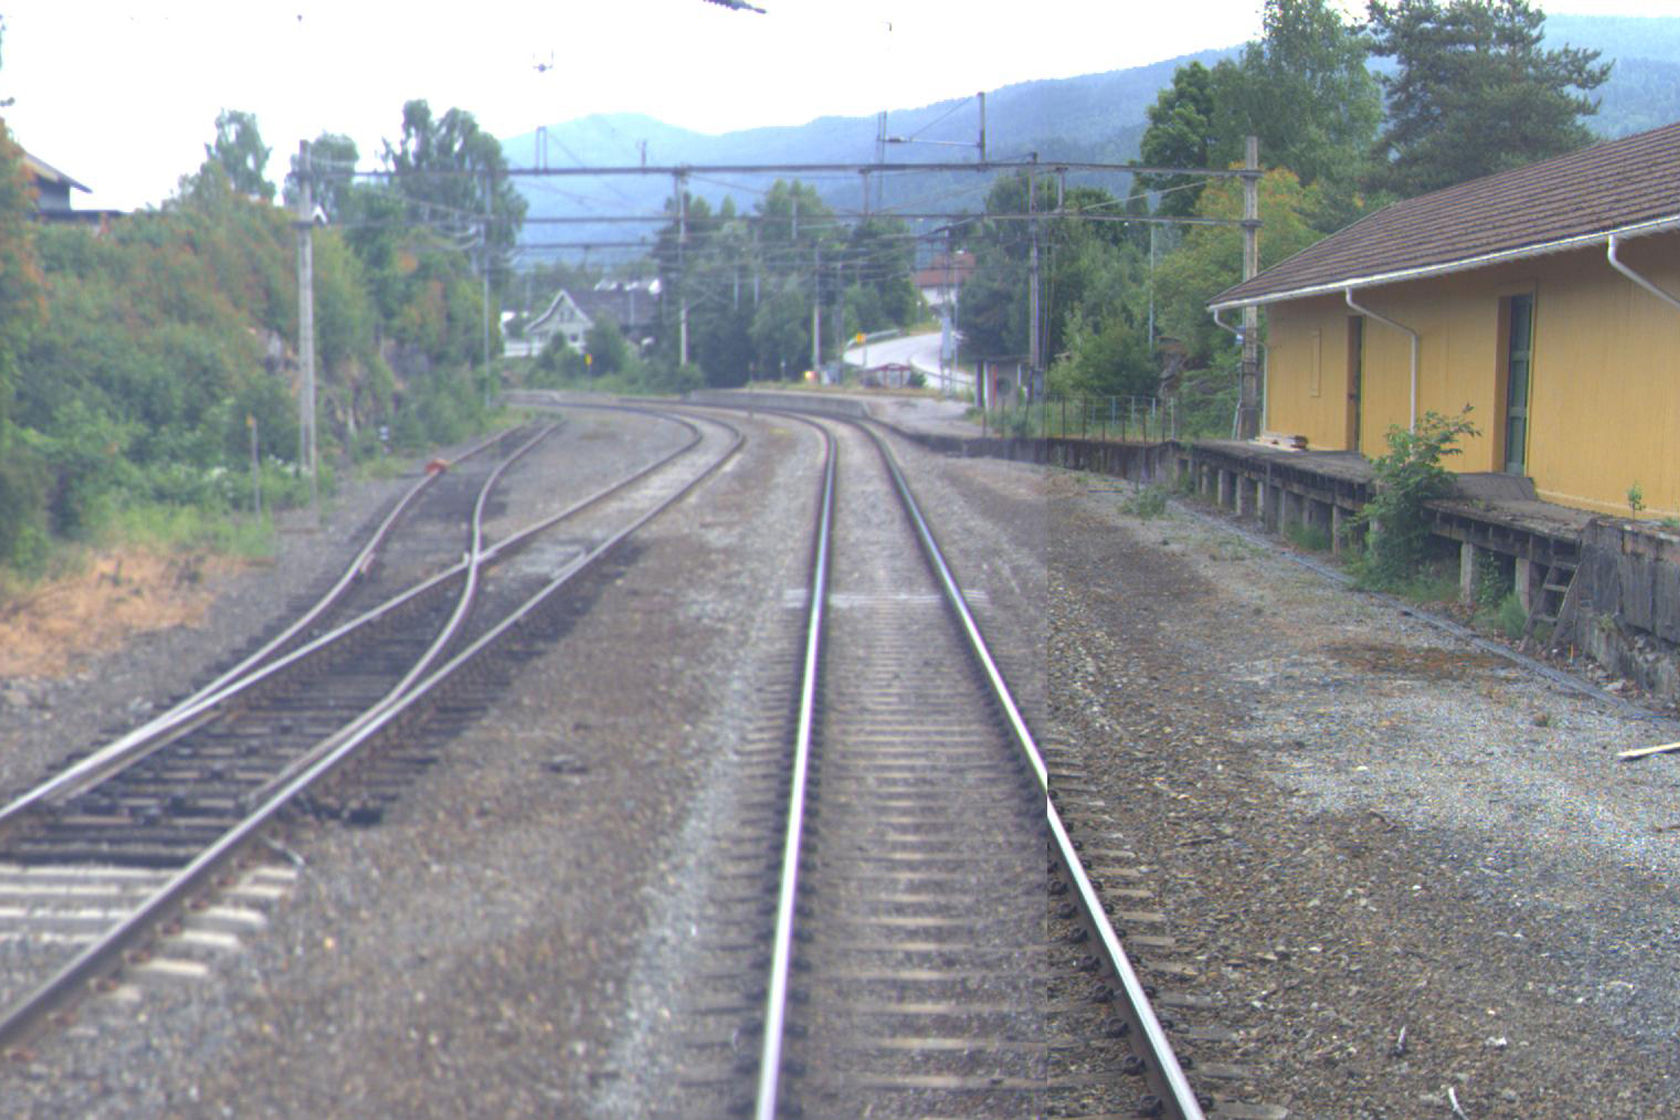 Tracks and building at Geithus station